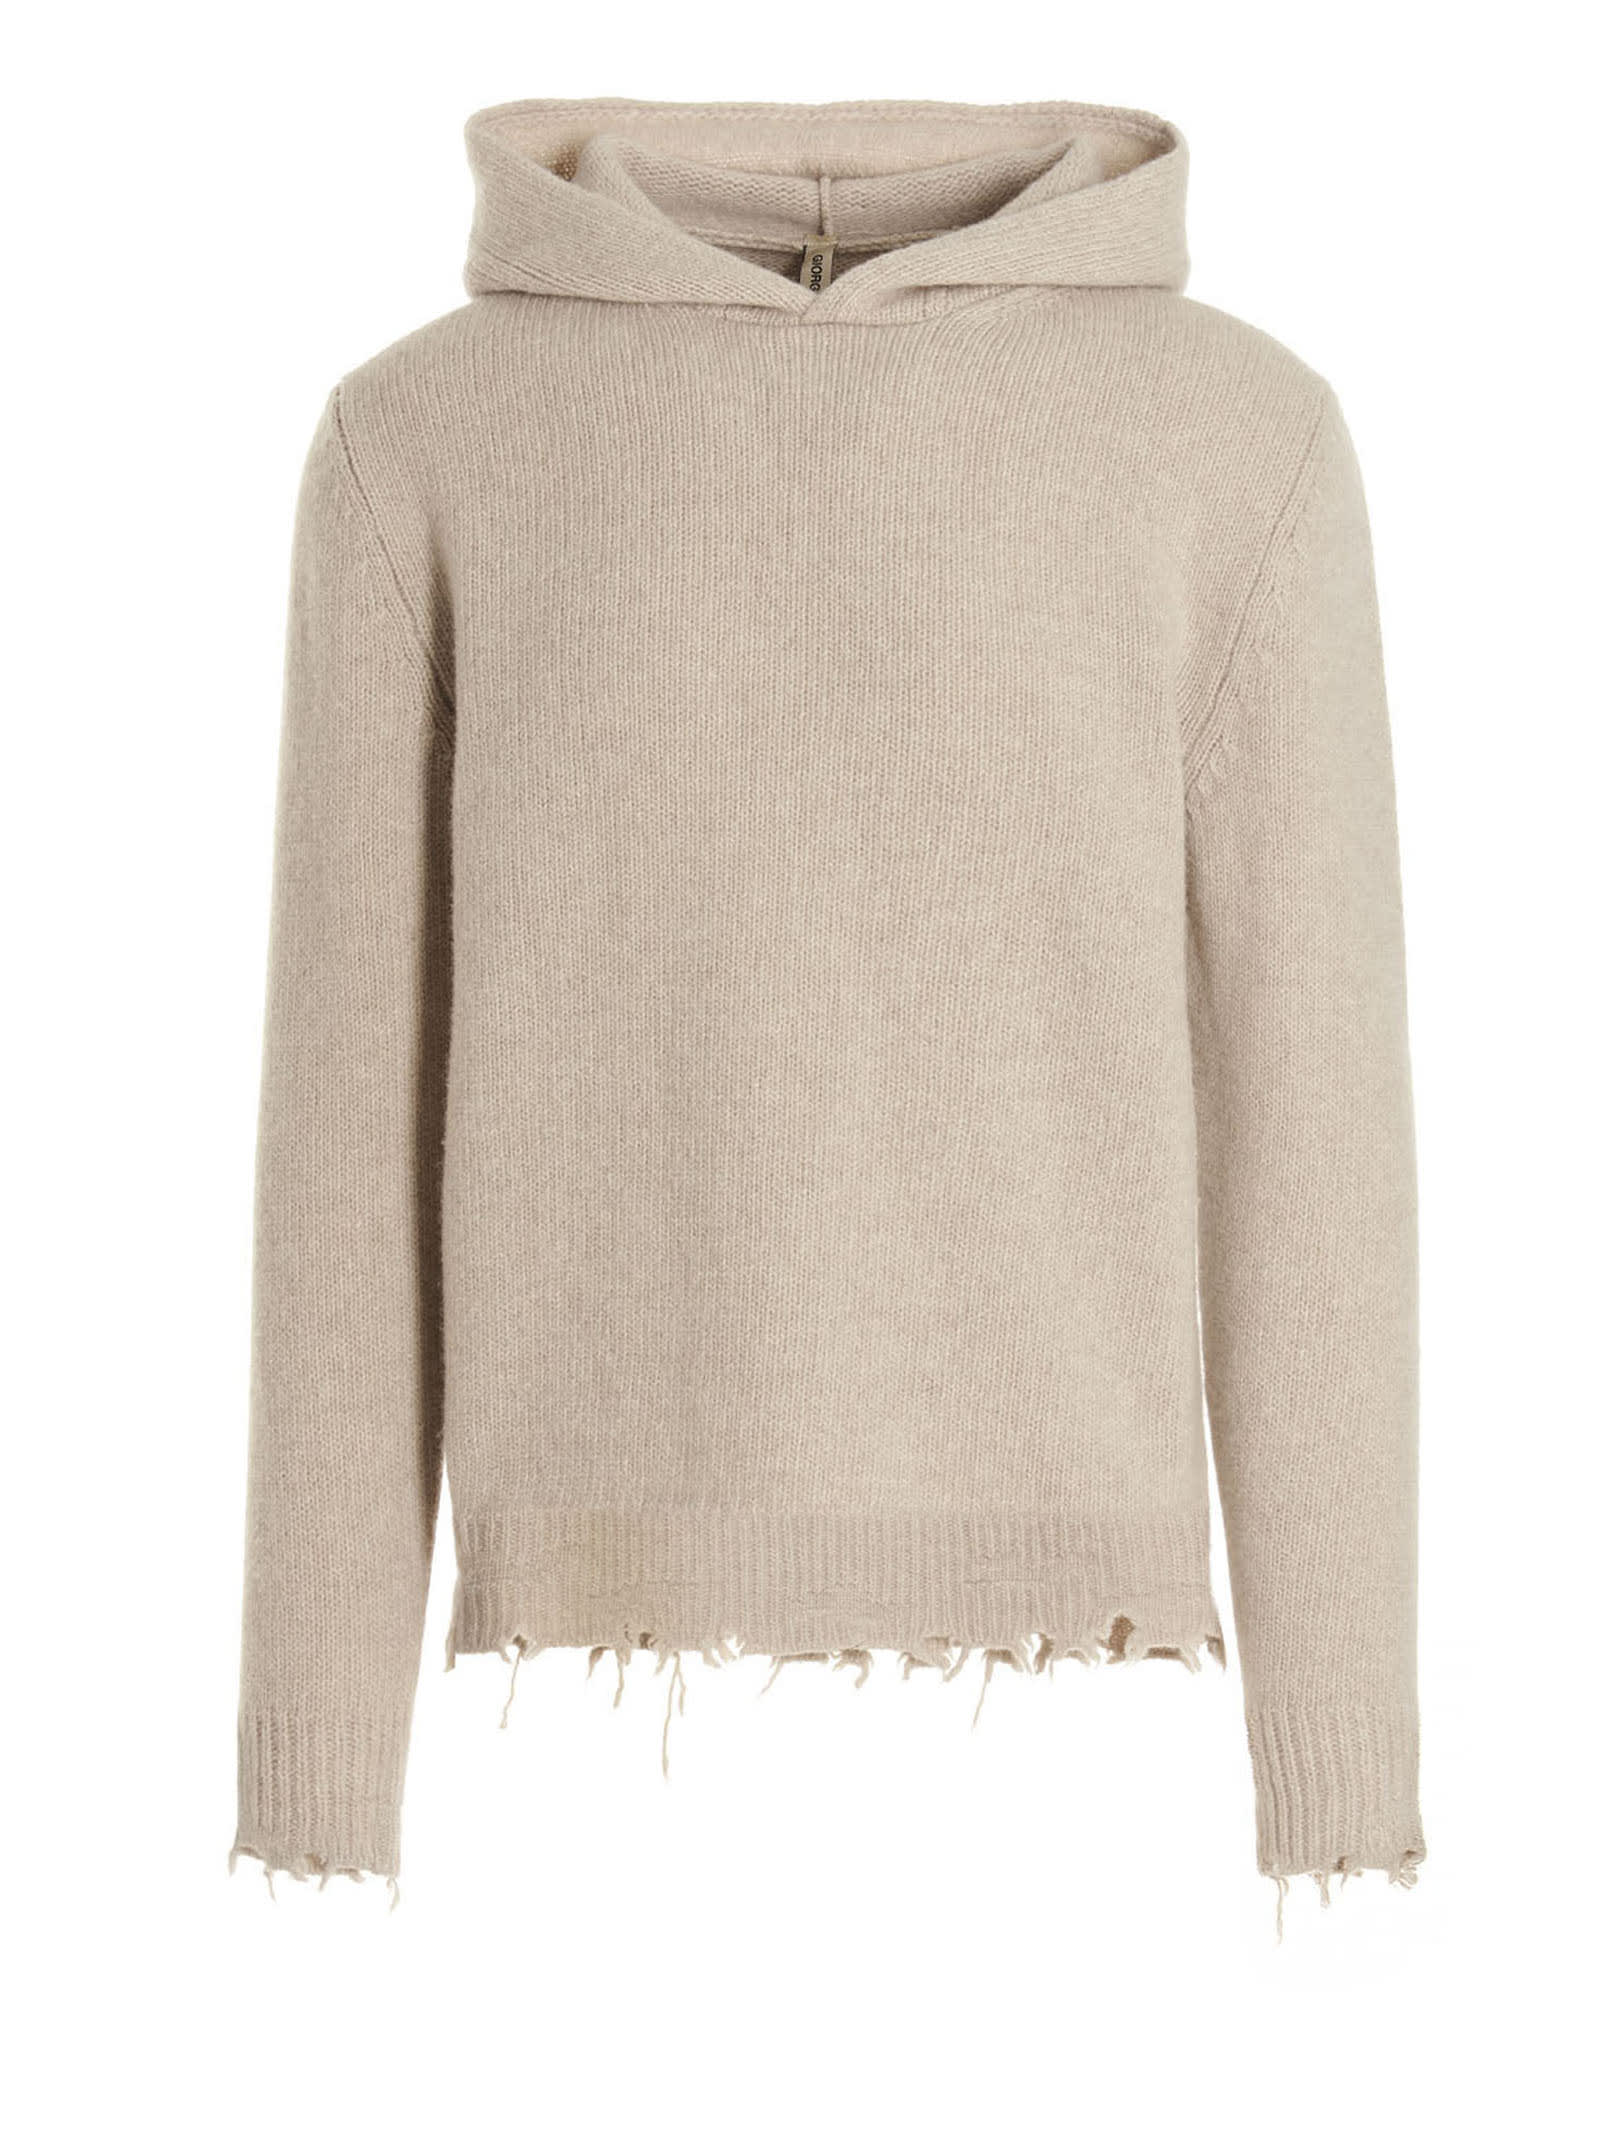 Giorgio Brato Hooded Sweater Featuring A Destroyed Effect